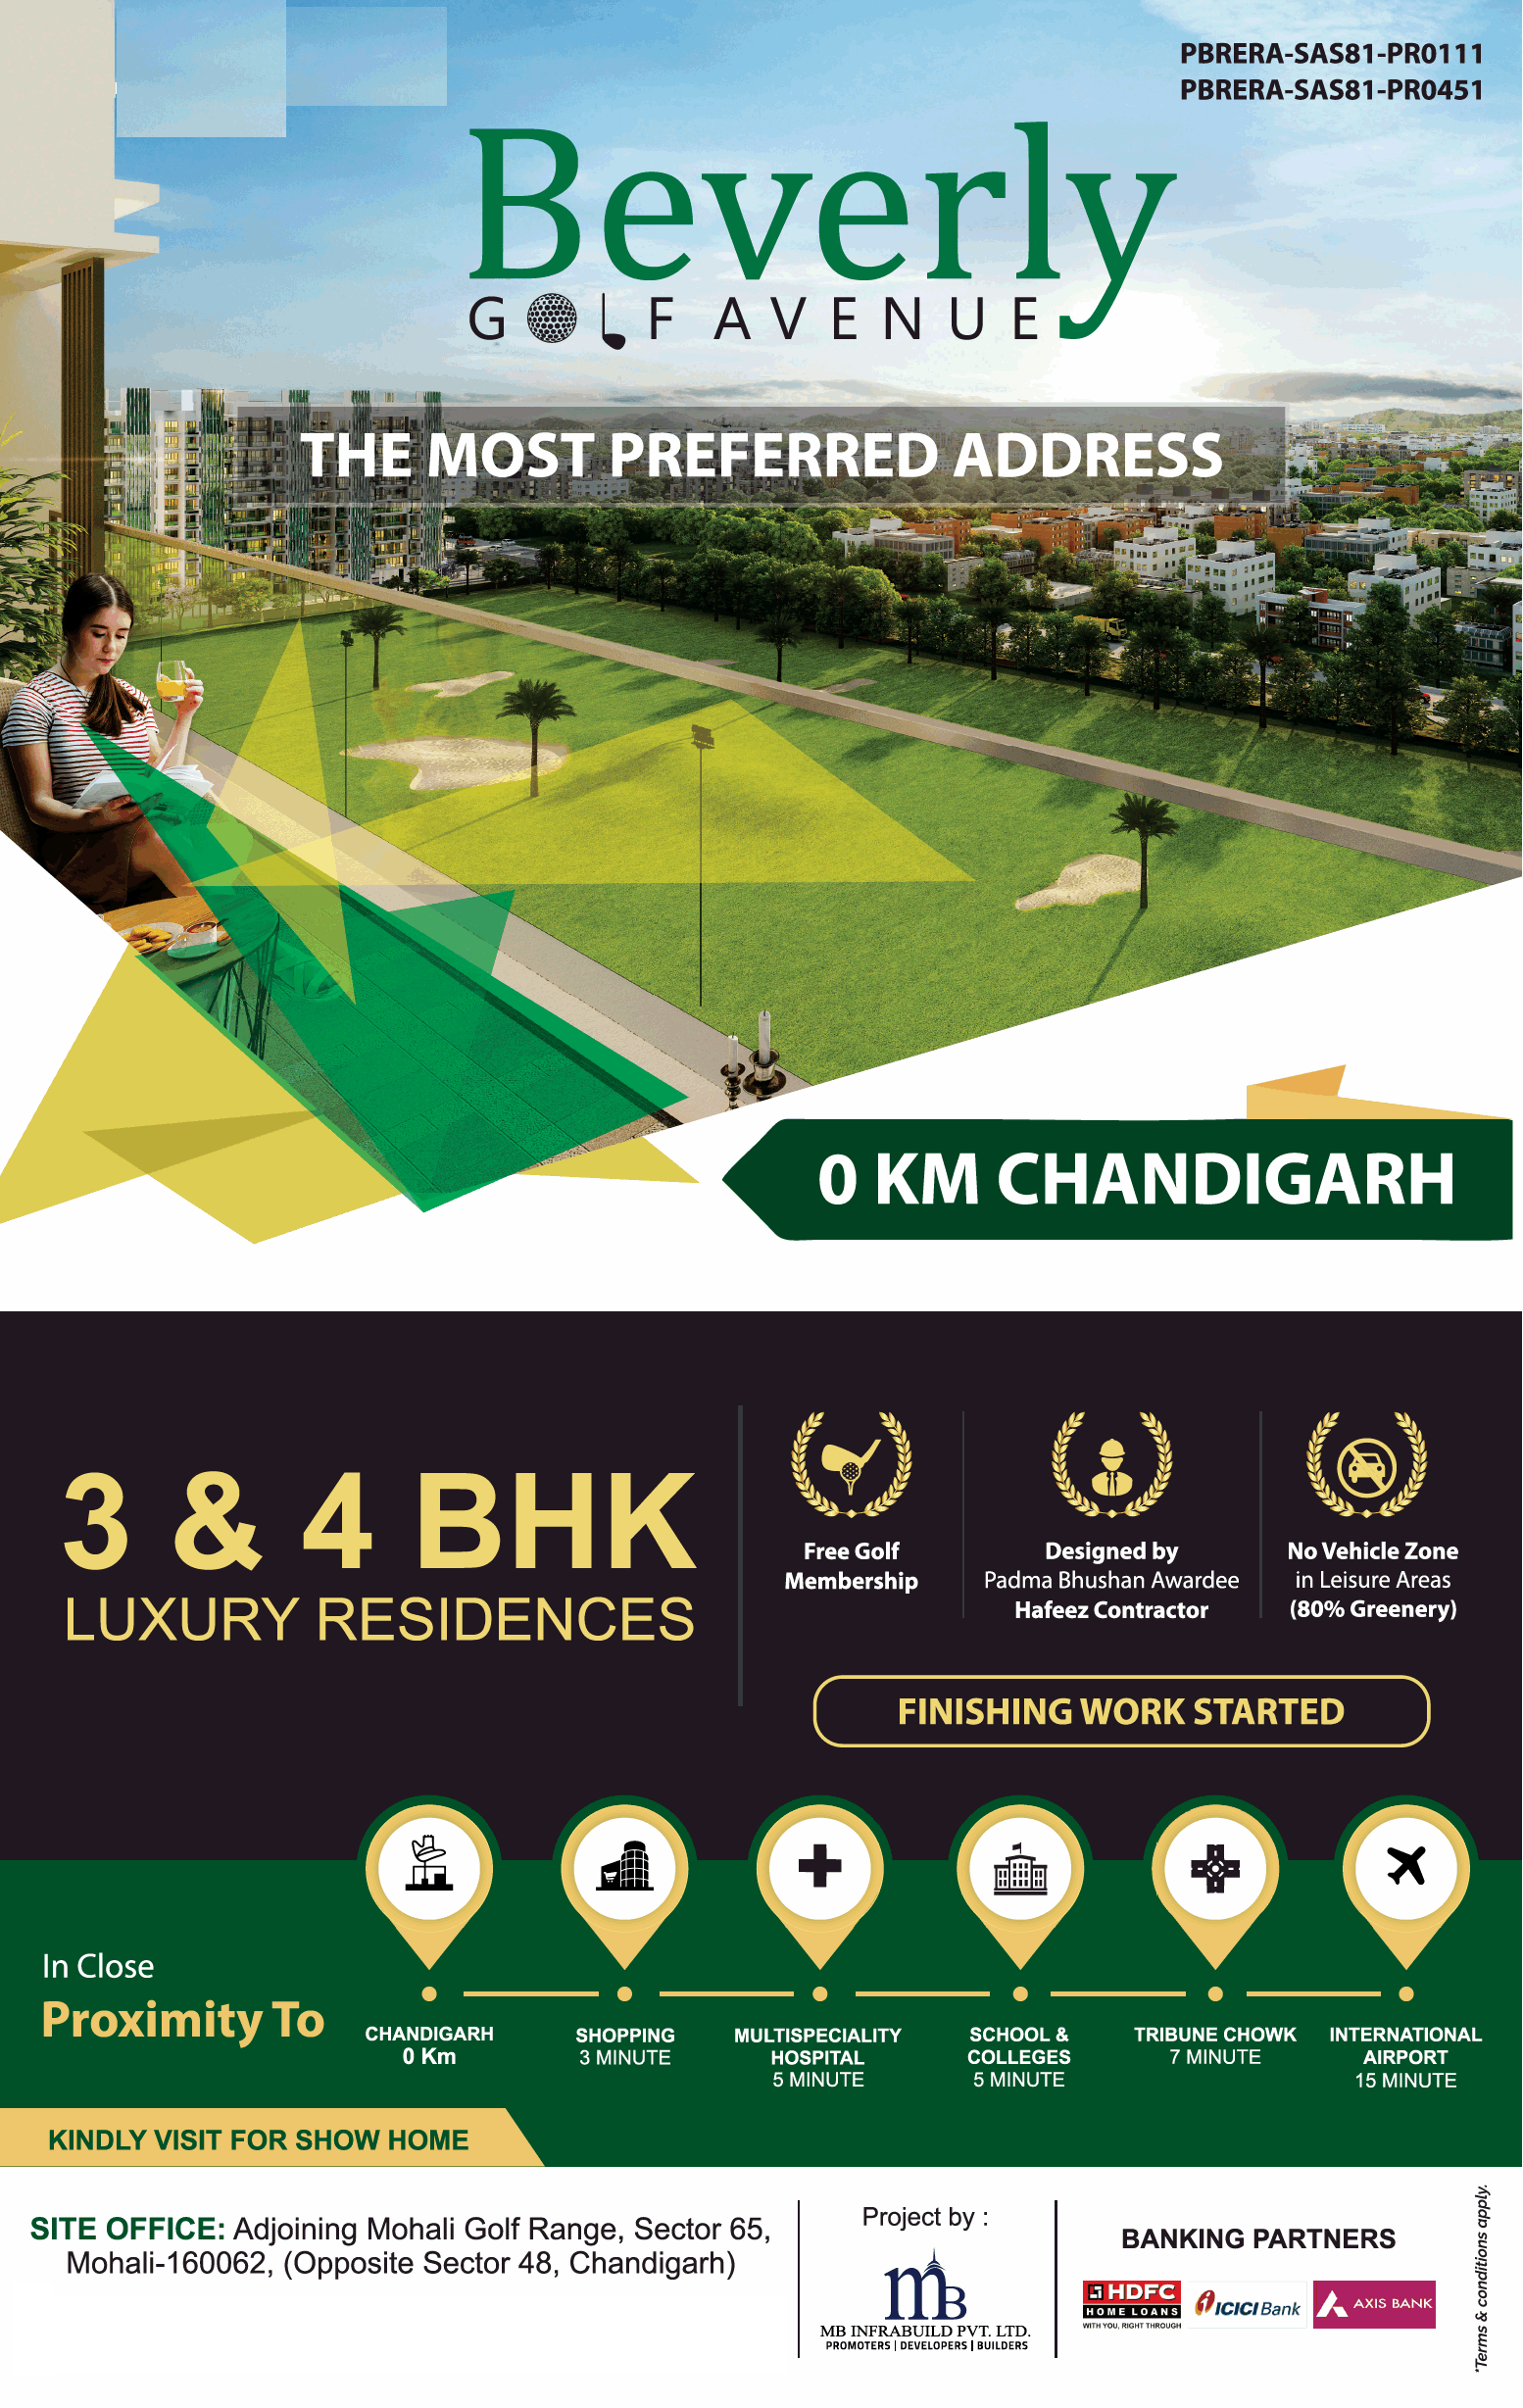 3 & 4 BHK Luxury Residences at MB Beverly Golf Avenue, Mohali